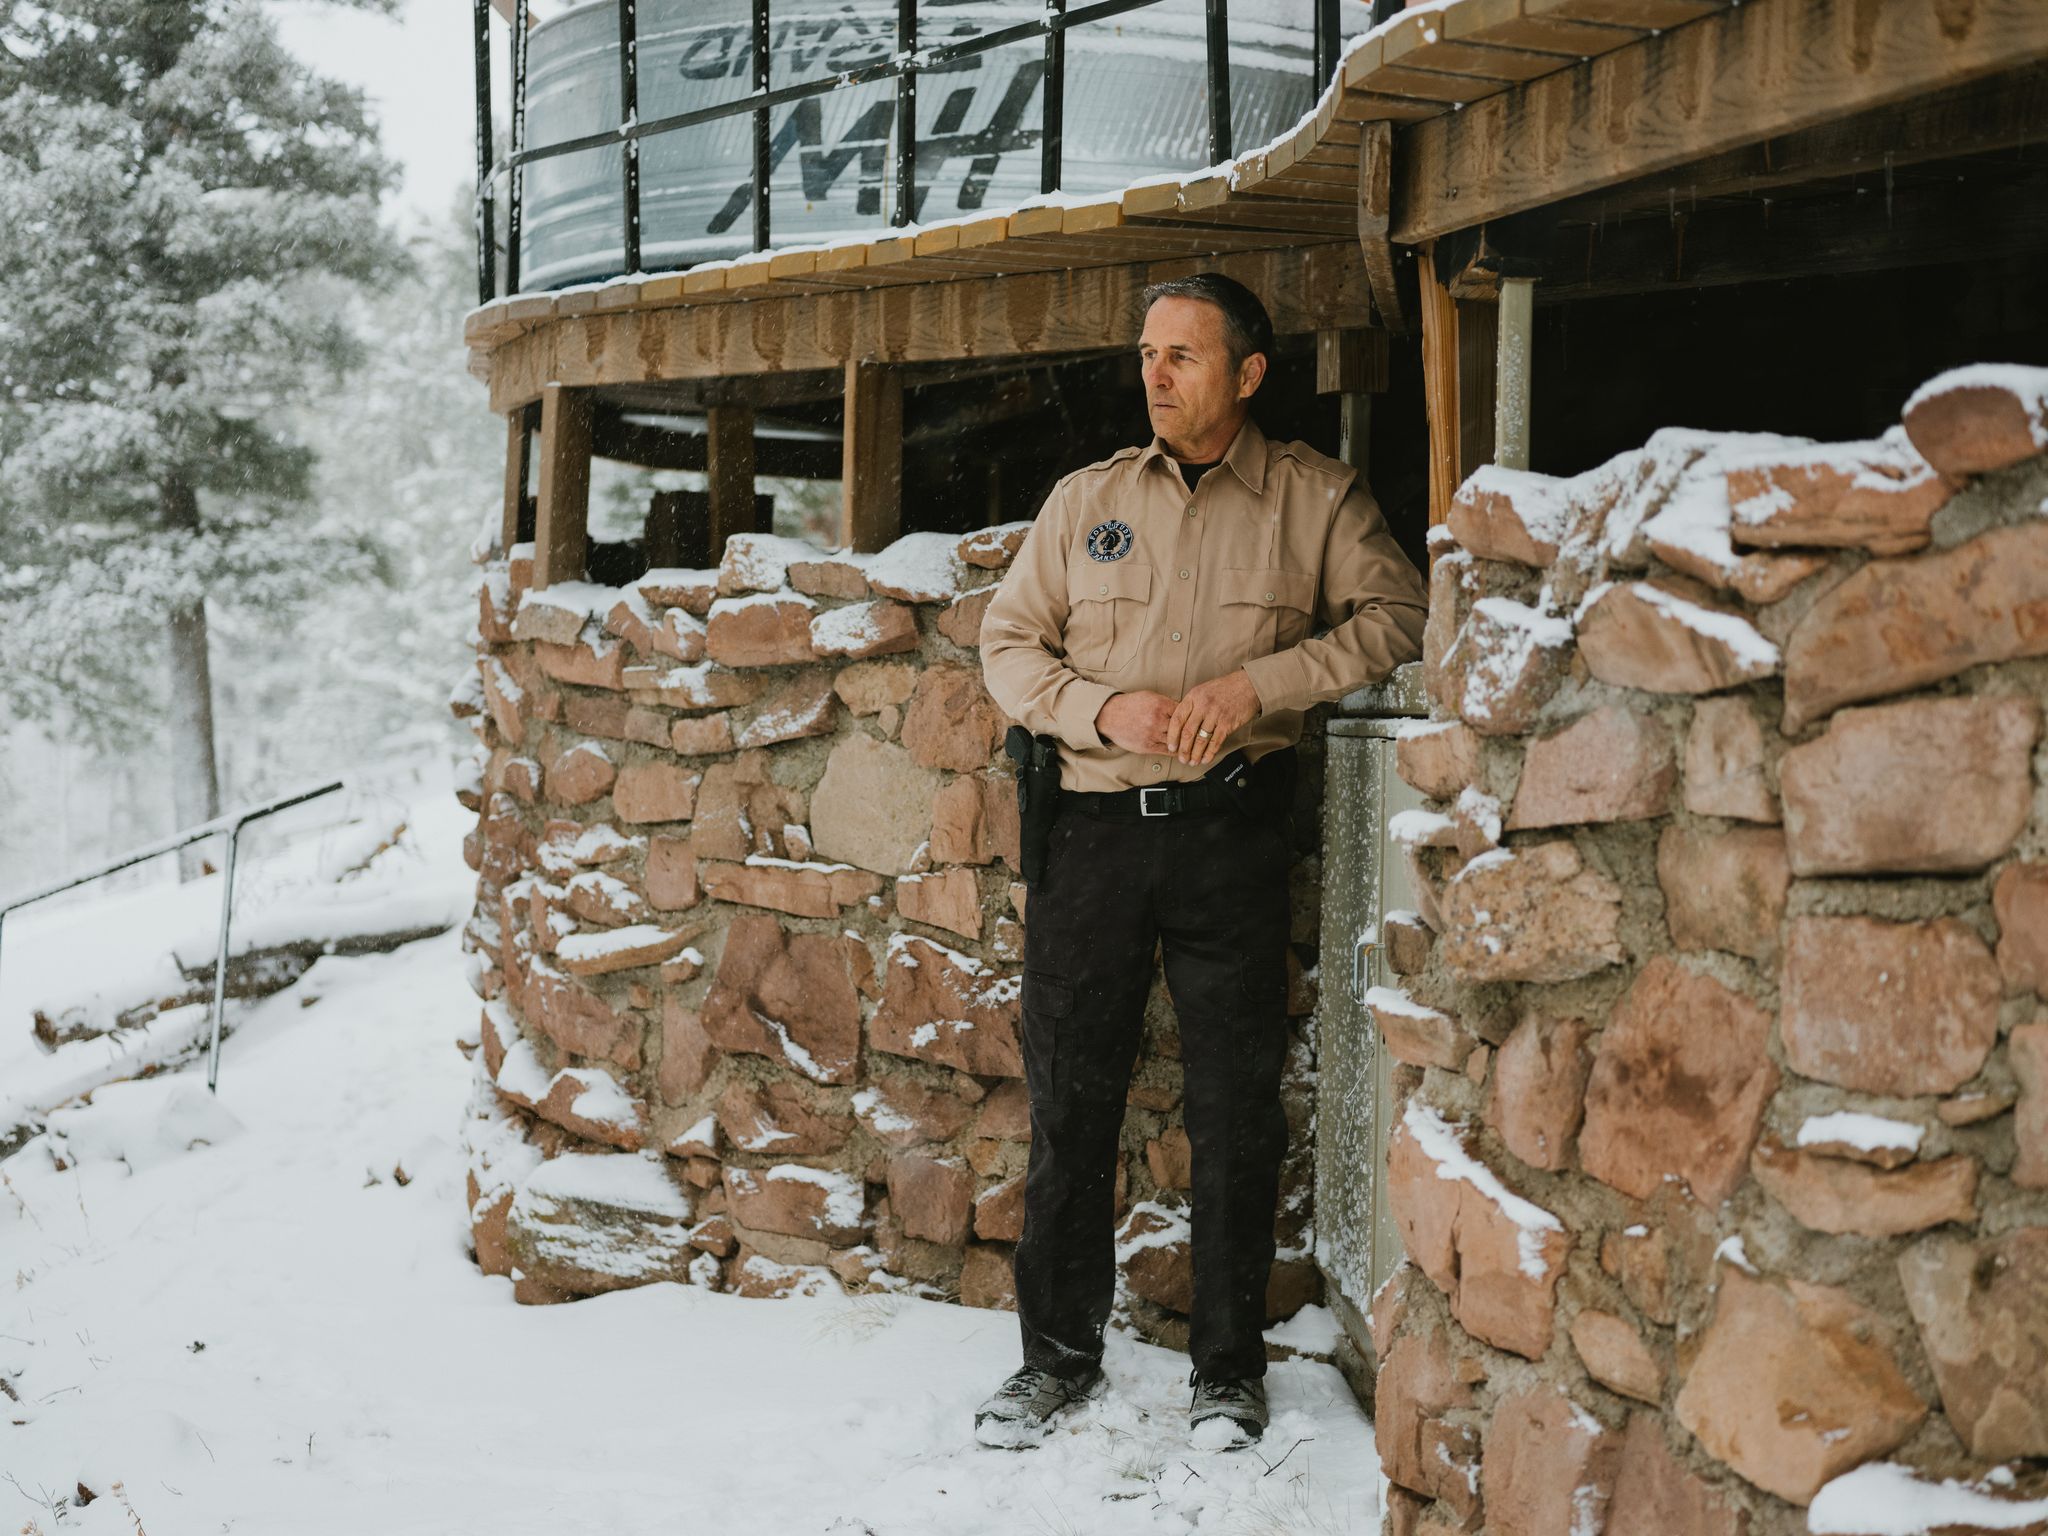 Drew Miller at Fortitude Ranch in Colorado photographed in March 2020.